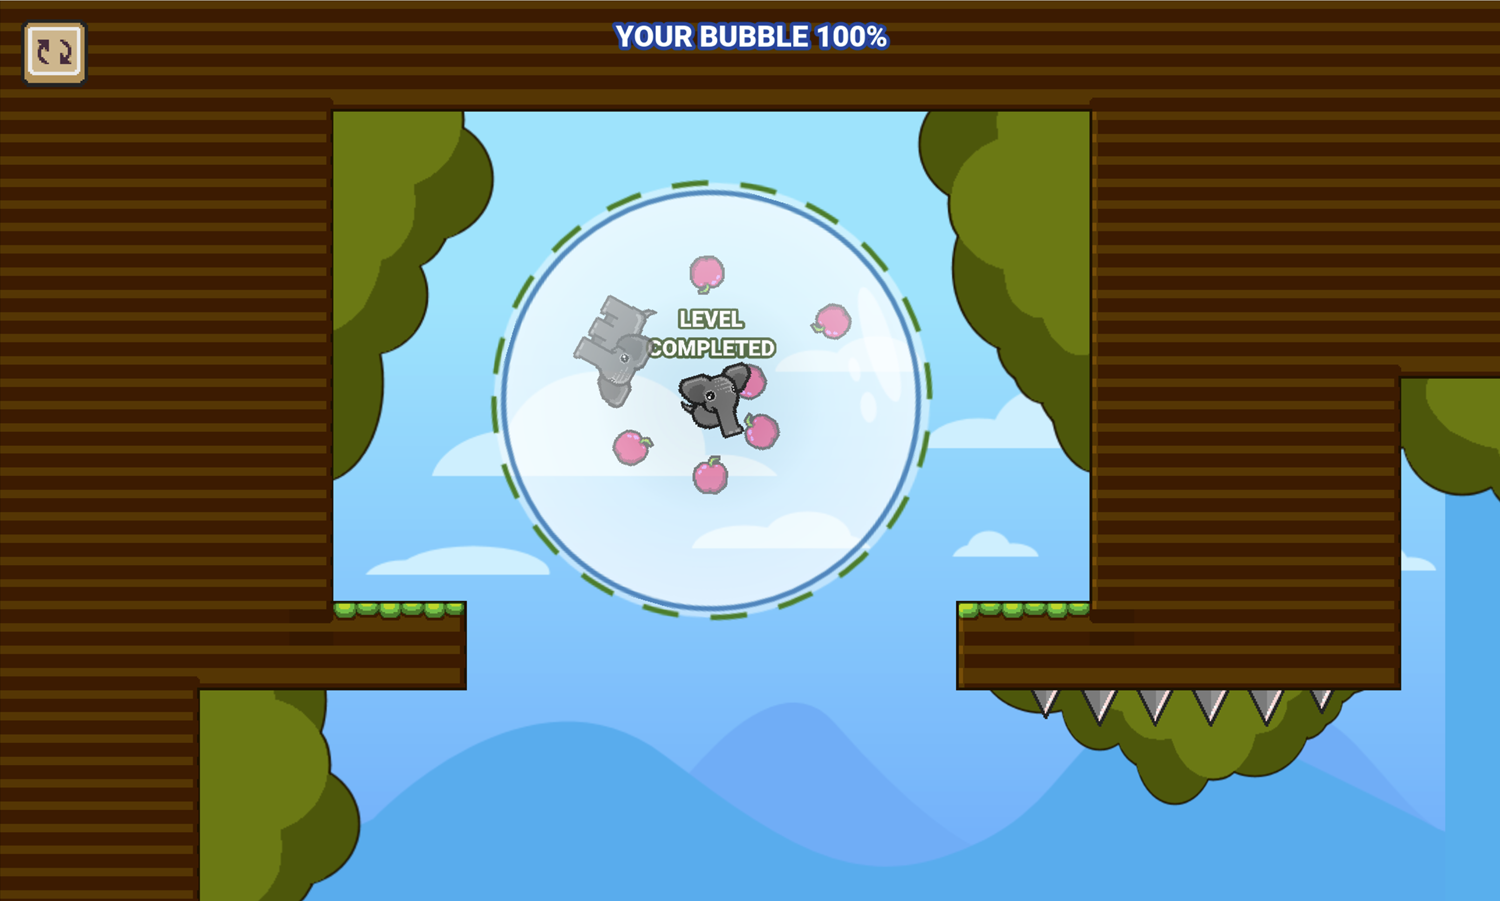 Heliumphant Game Level Completed Screen Screenshot.